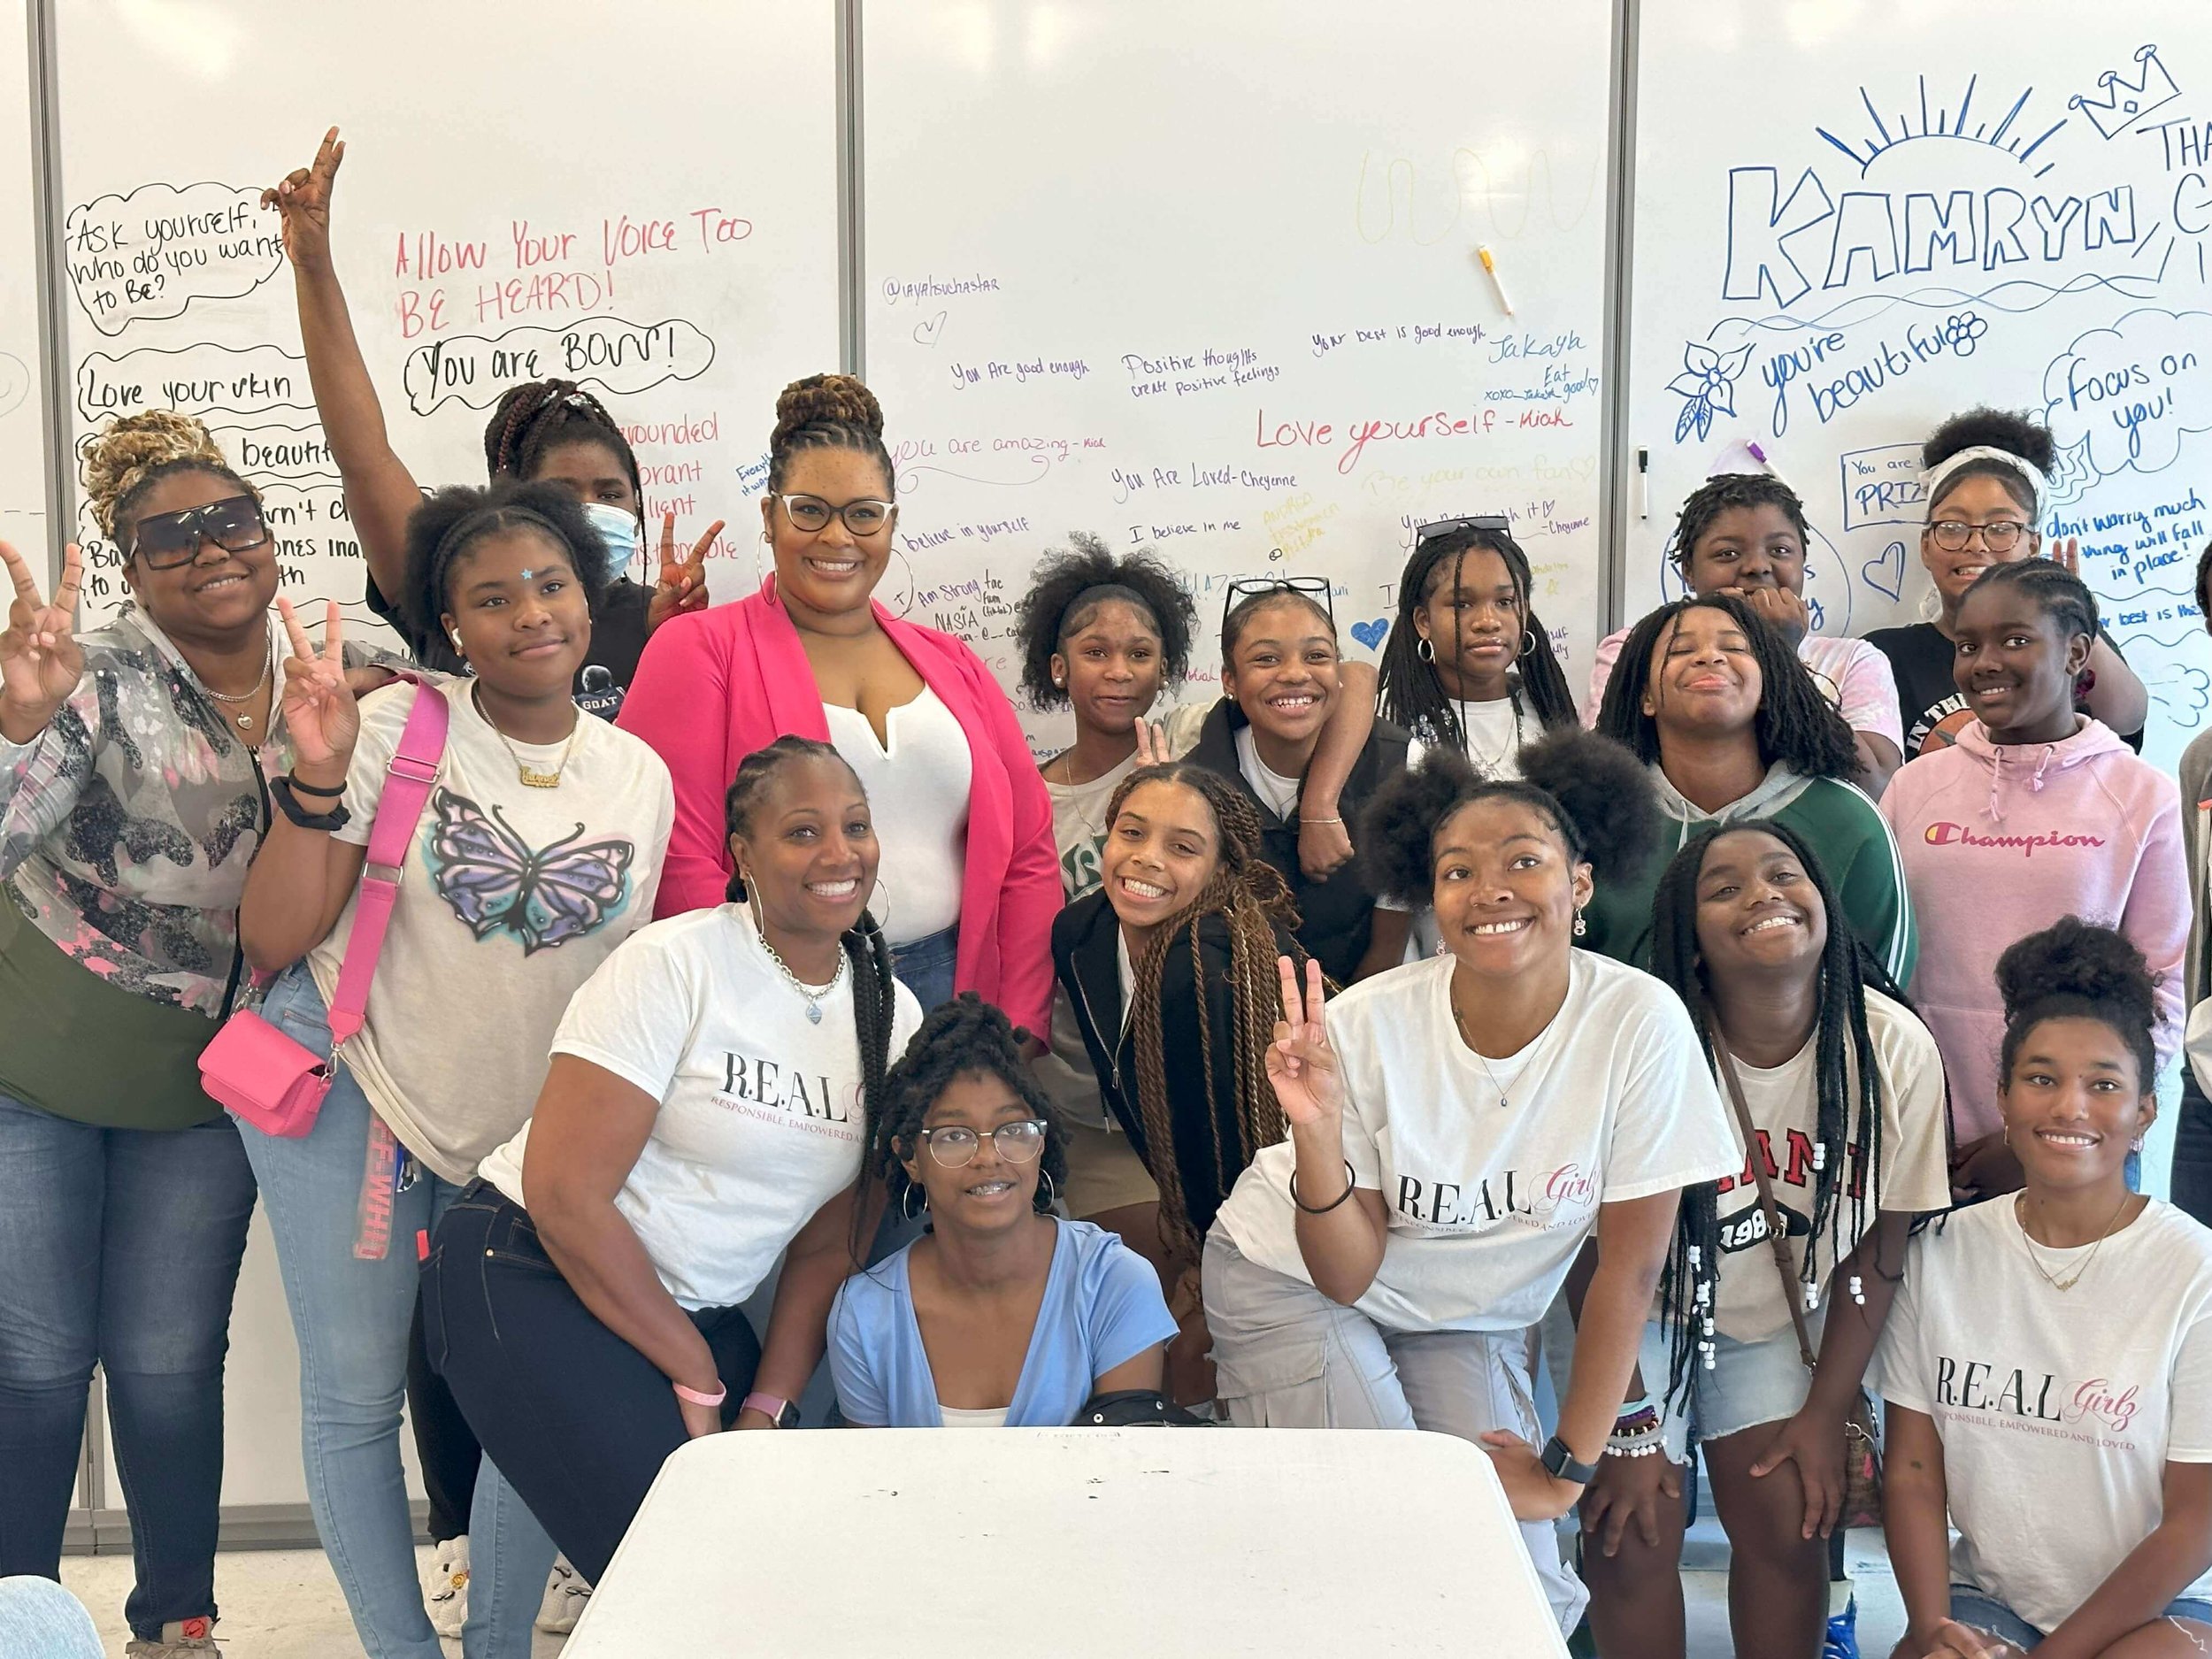 Stacy Crawley_Tammie Mobley_R.E.A.L Girlz Group Photo at Teen Workshop 7-18-23.jpg